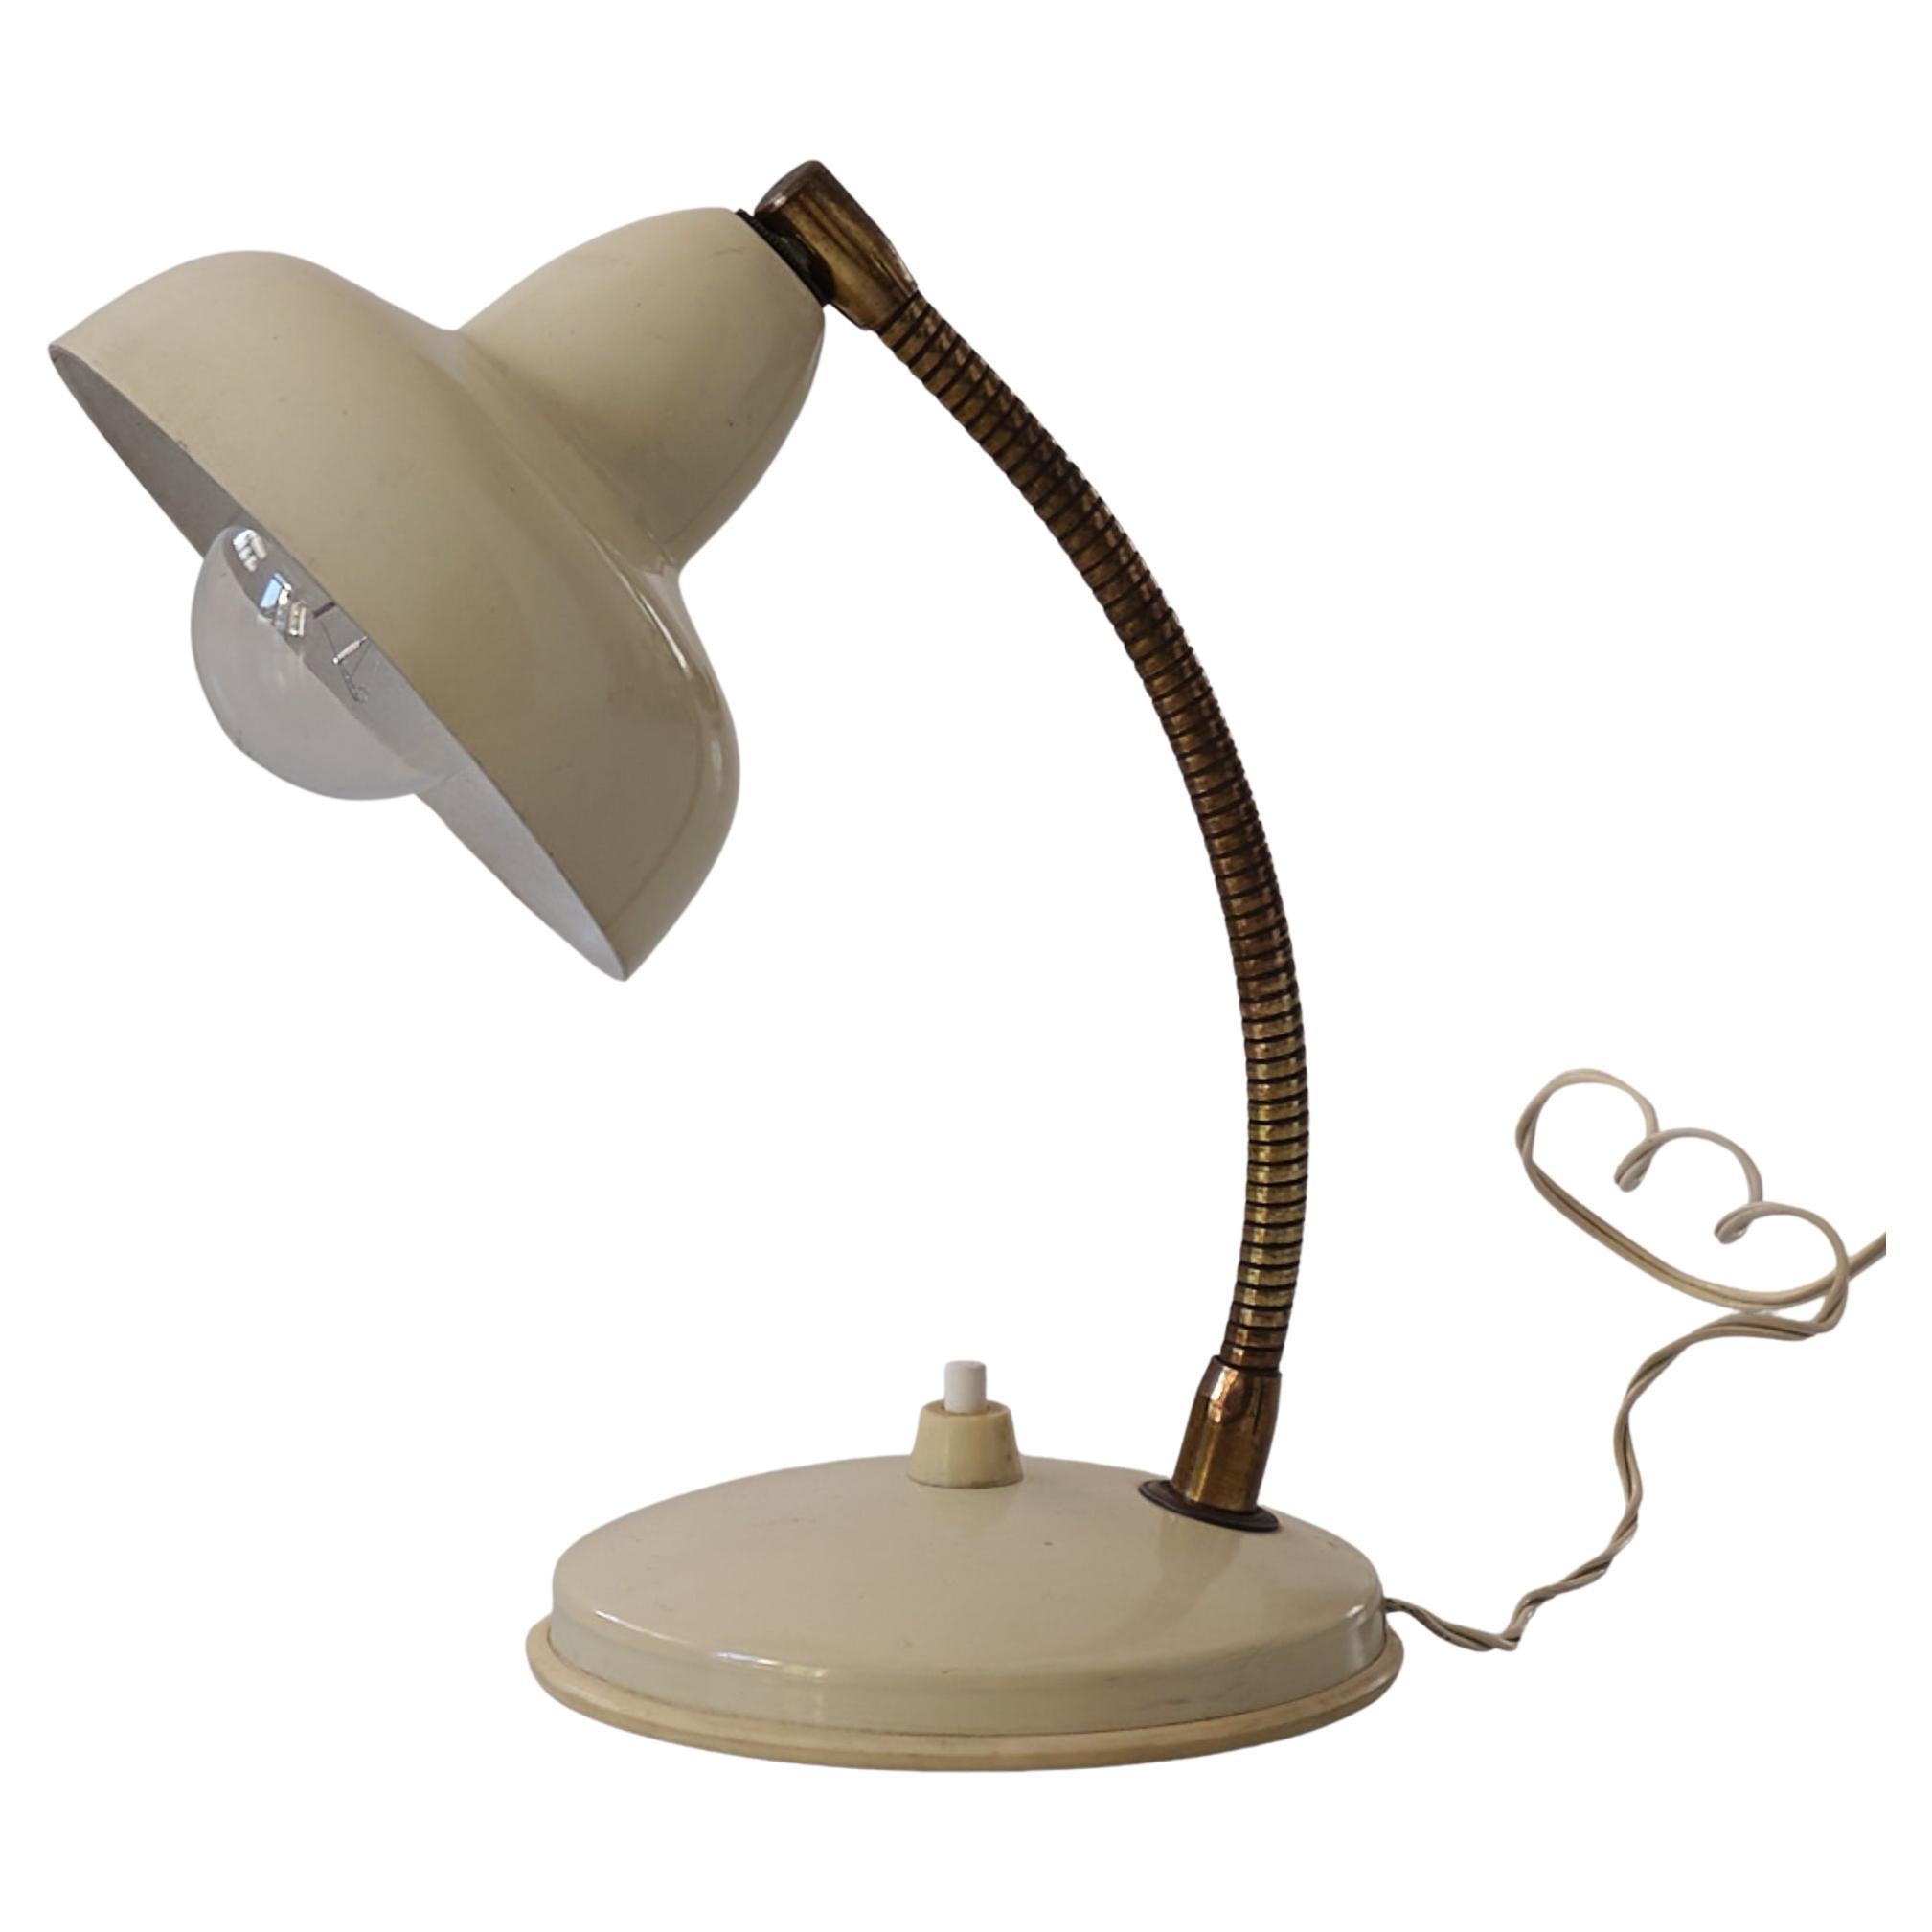 Vintage Italian Table or Desk Lamp in Cream Lacquered Metal and Brass, 1950s